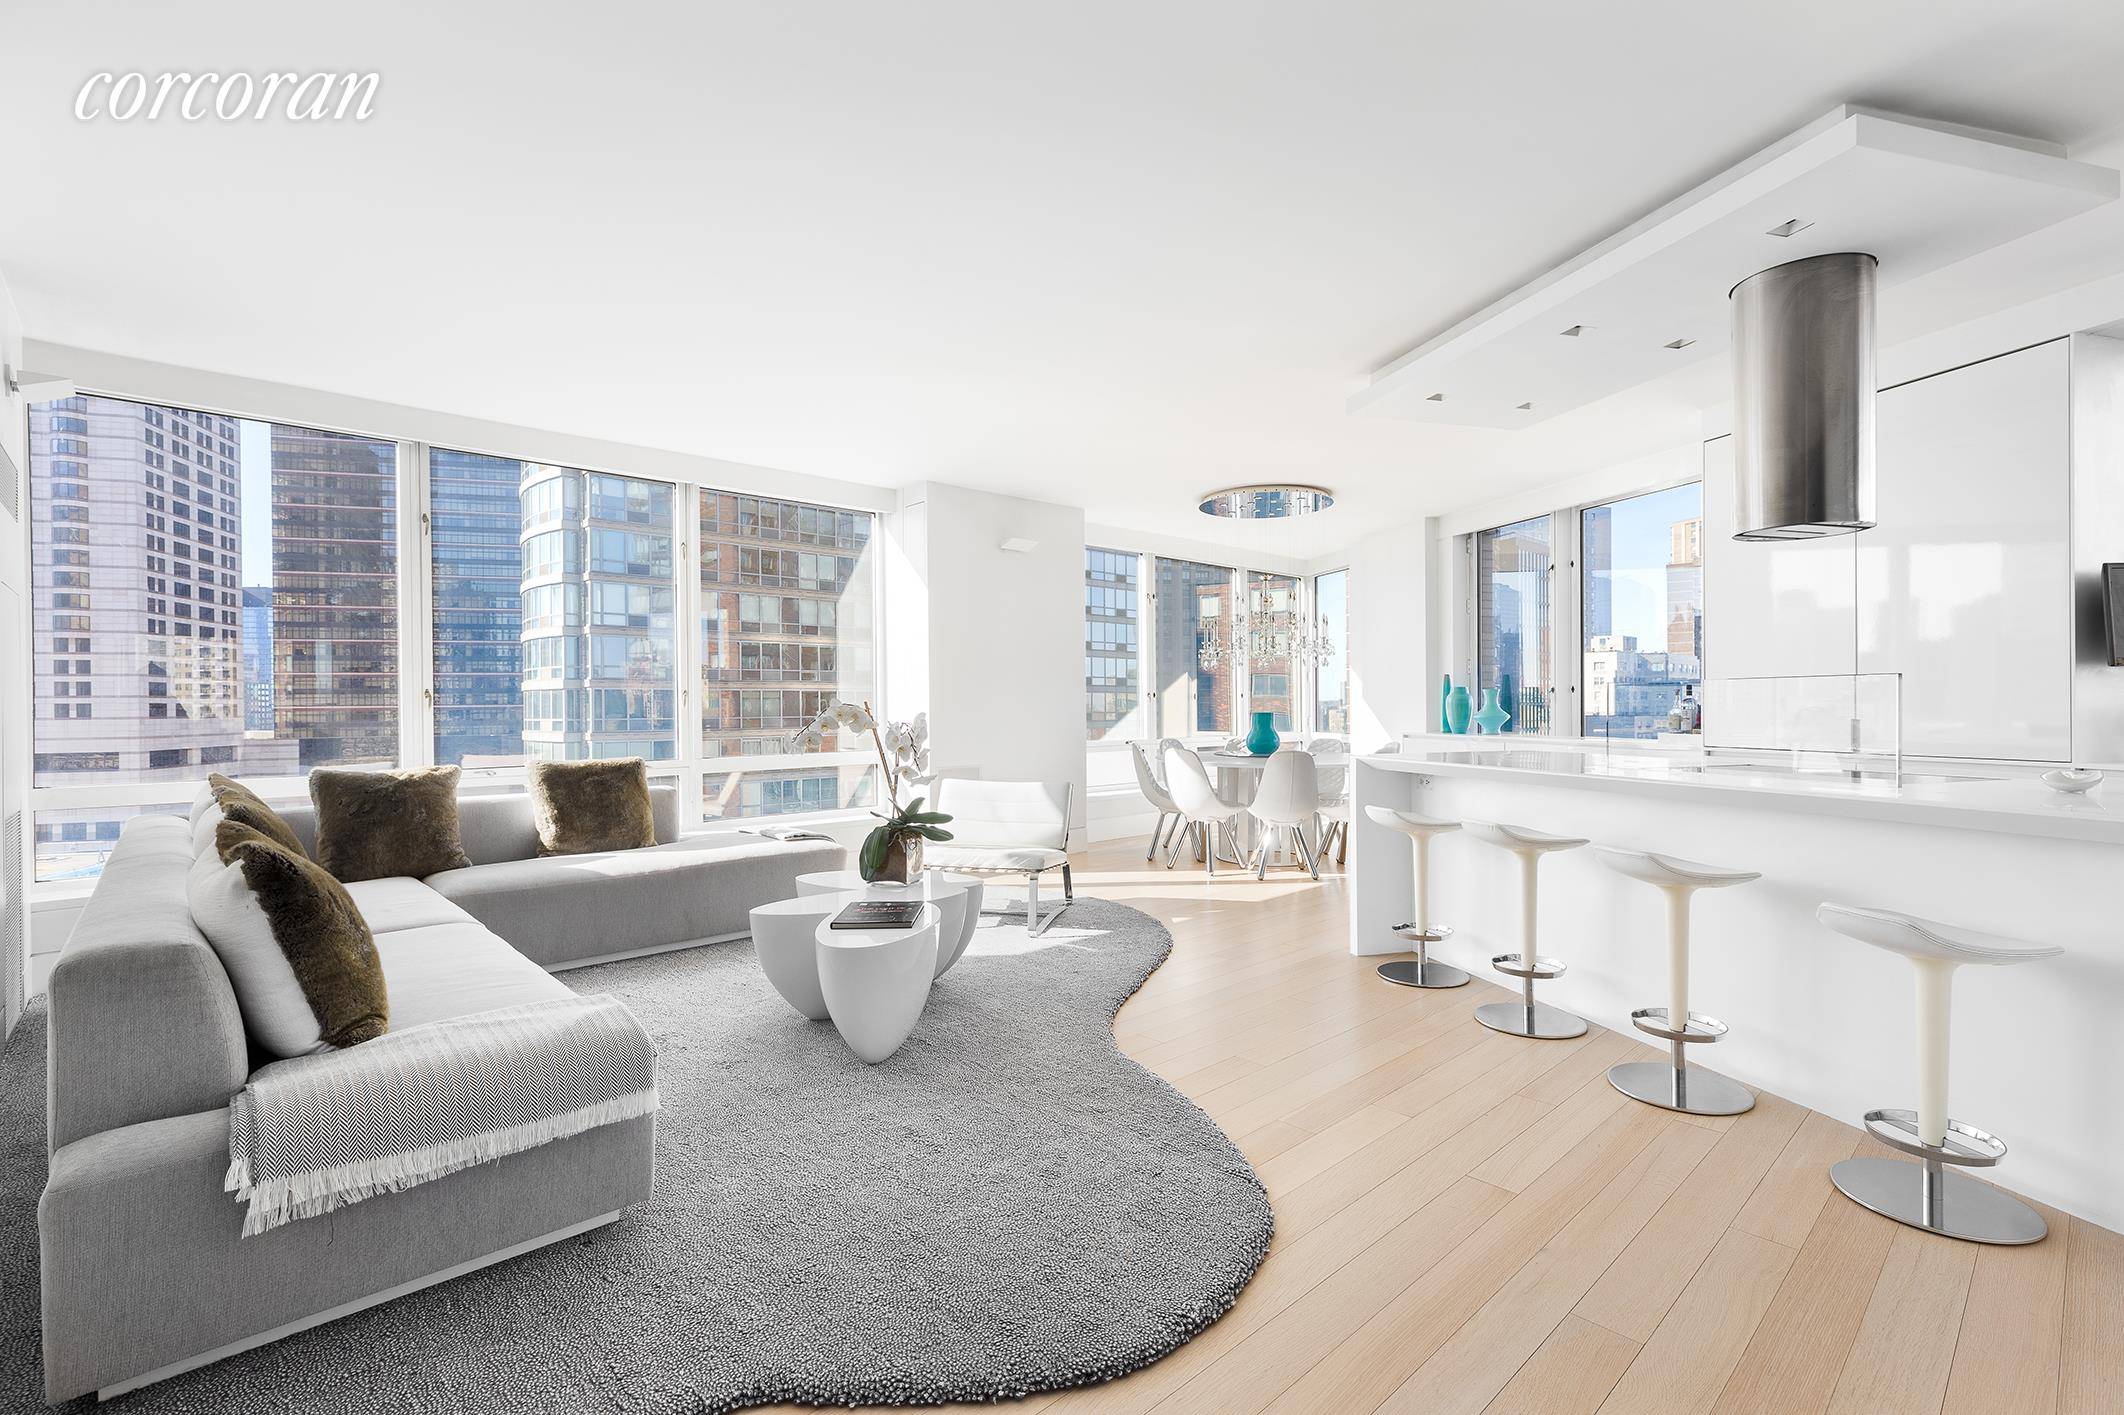 Welcome to 150 Columbus Avenue, Apartment 15AB.